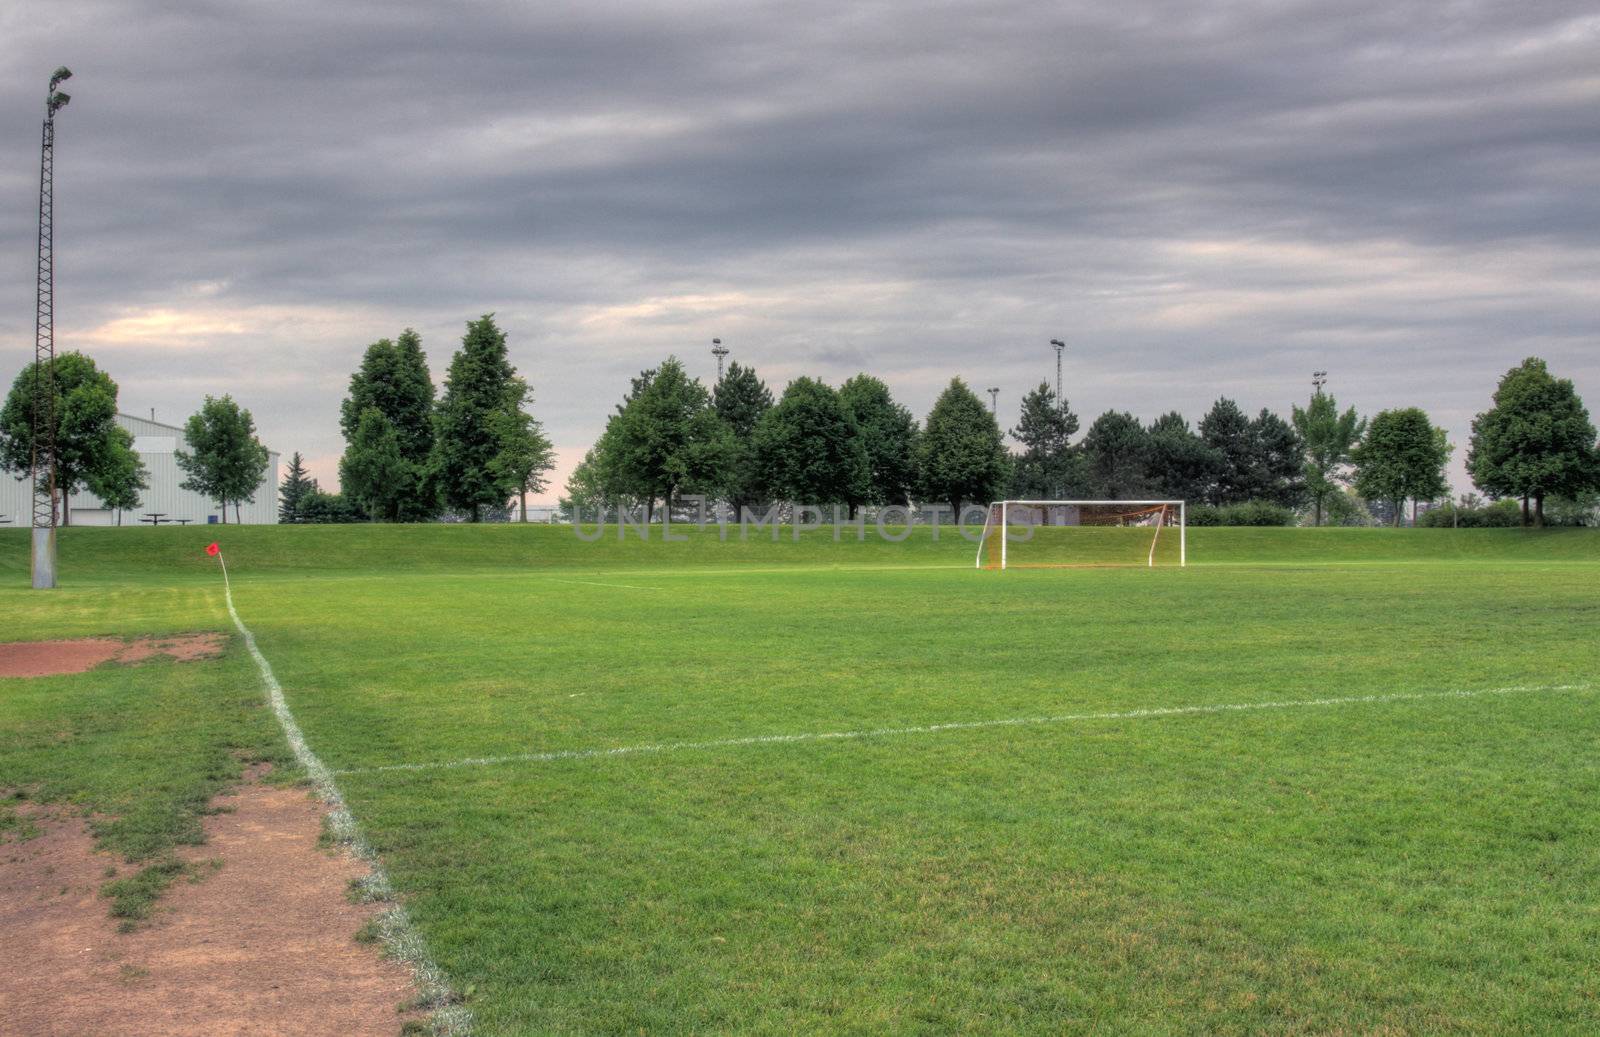 Grey Clouds and Soccer Field
 by ca2hill